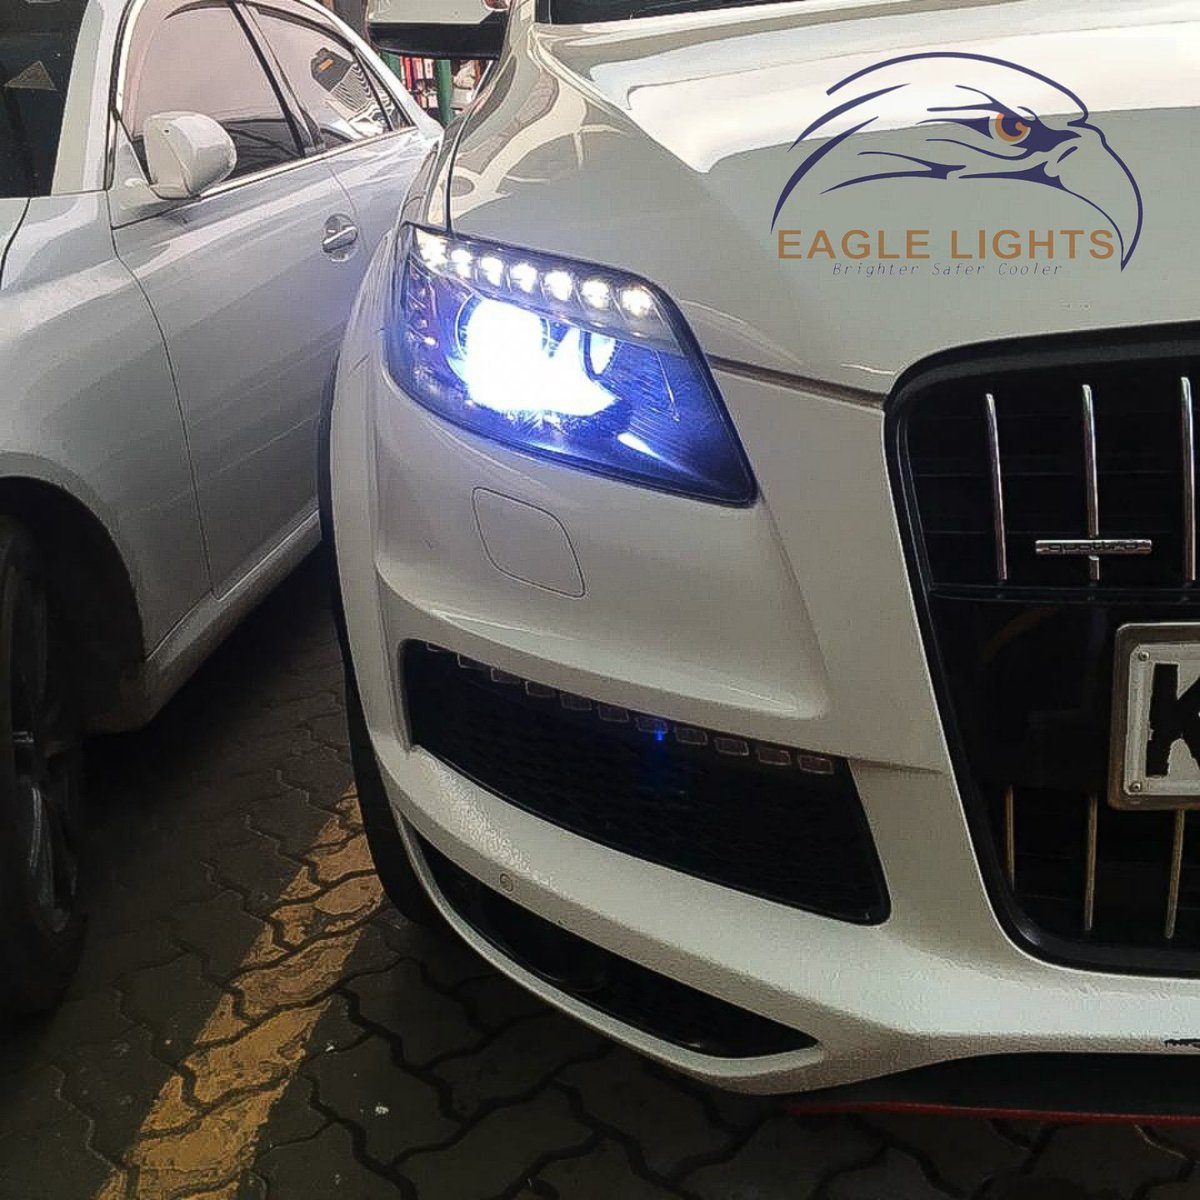 Safety is more important than convinience
Car safety starts with good lighting from @eagle lights 

Call /WhatsApp 0785 173 374

#ParteAfterParte #MoiDay #carlighting #eaglelights #carinterior